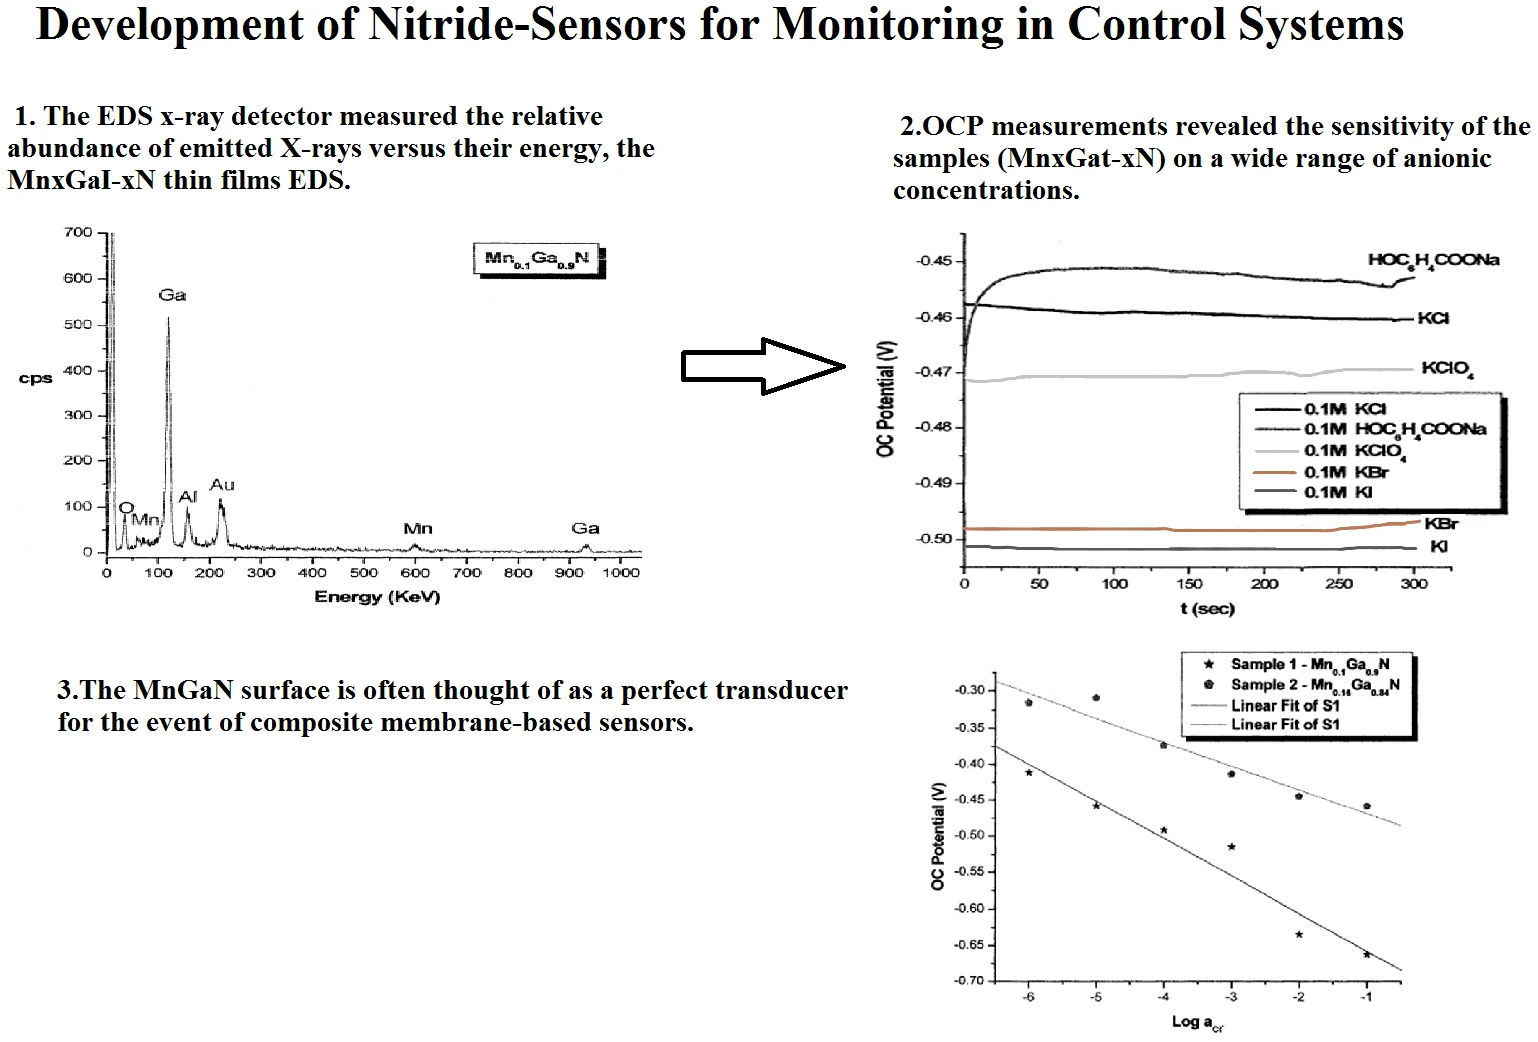 Development of nitride-sensors for monitoring in control systems